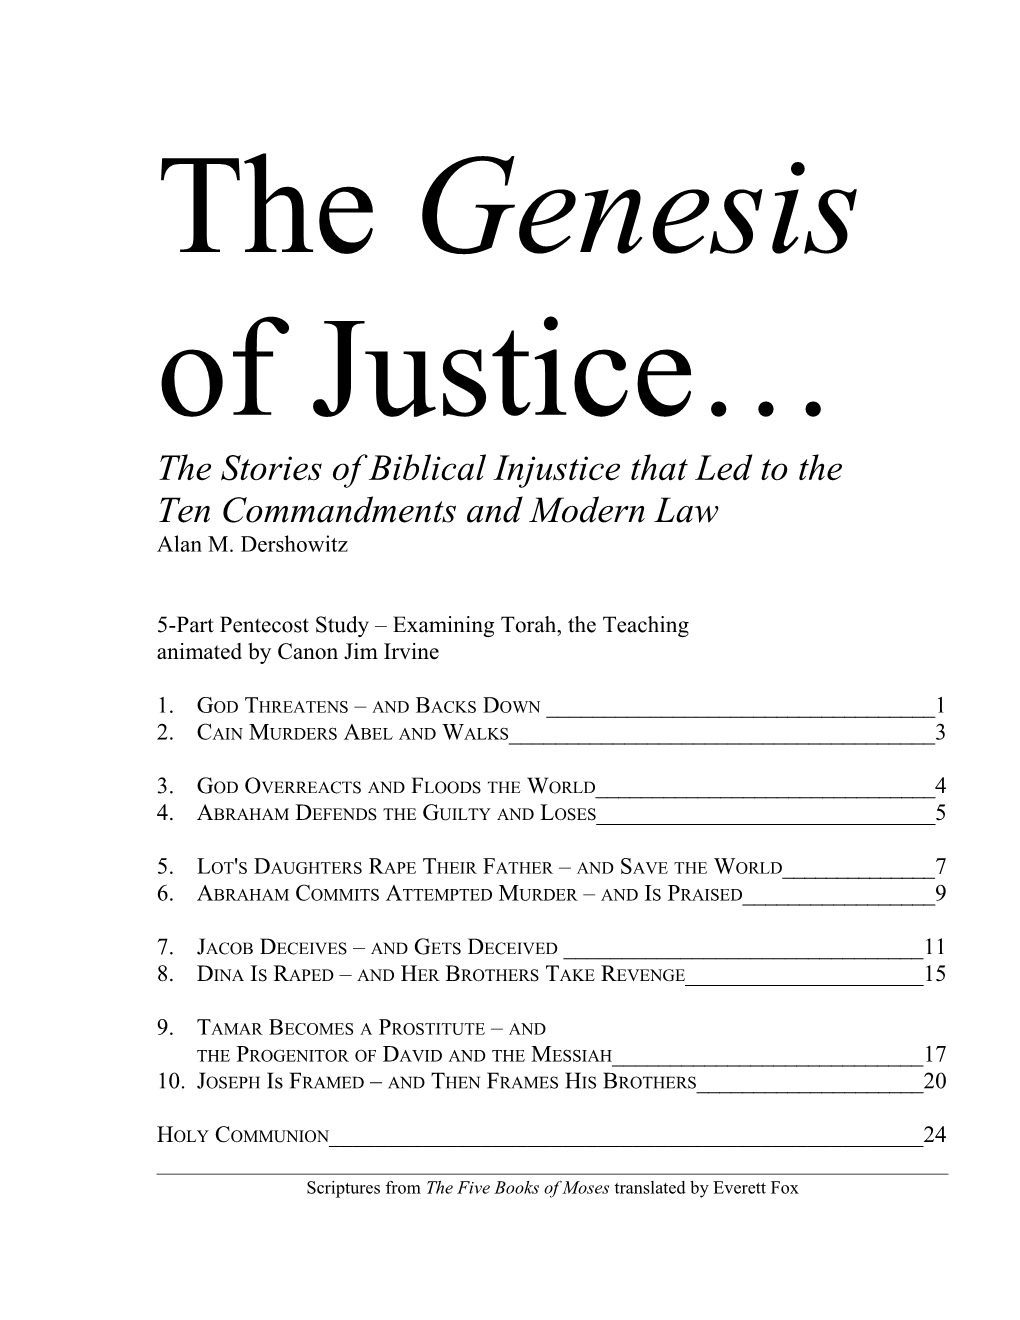 The Stories of Biblical Injustice That Led to The